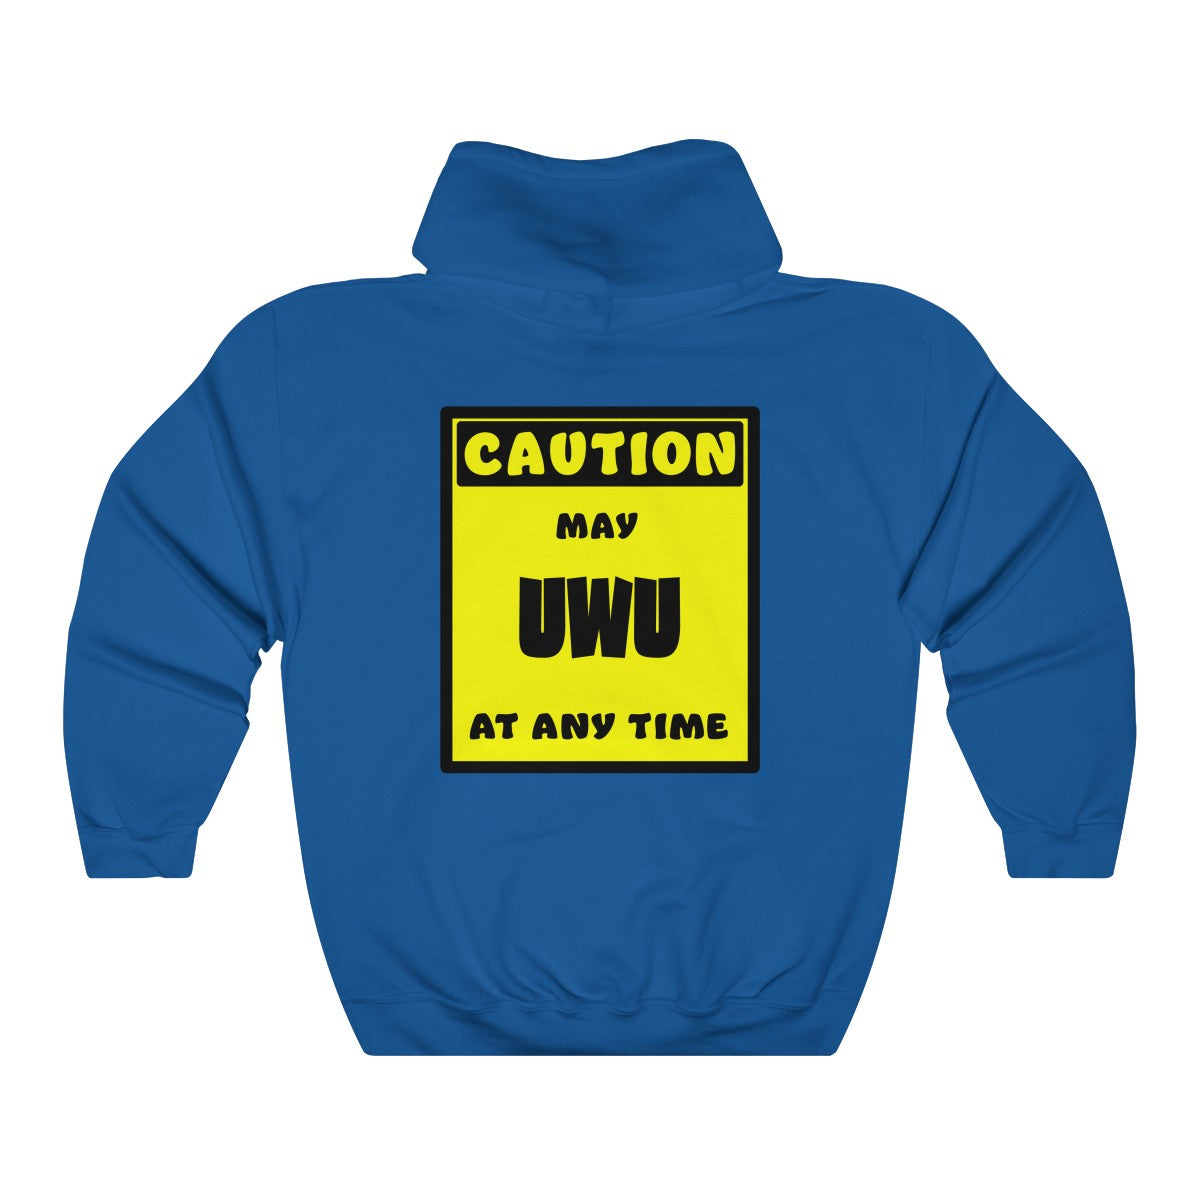 CAUTION! May UWU at any time! - Hoodie Hoodie AFLT-Whootorca Royal Blue S 